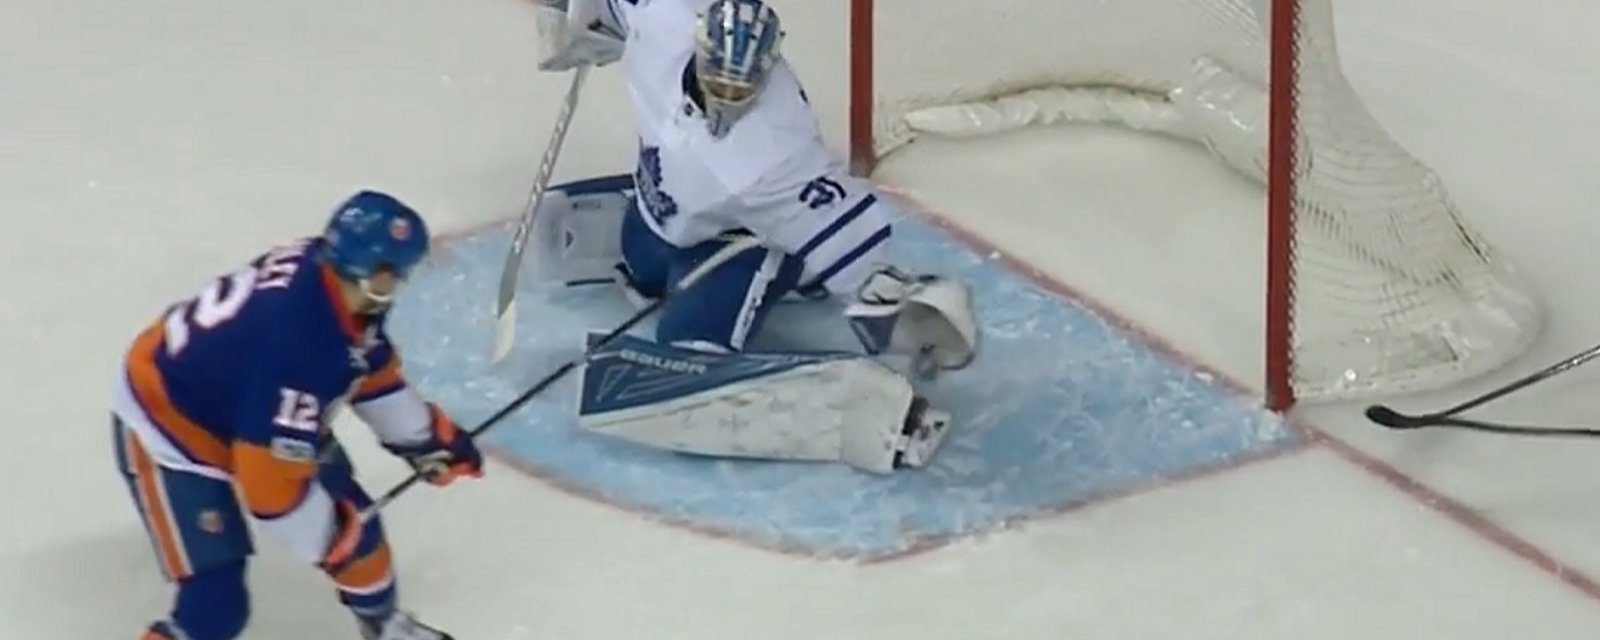 Watch: Leafs Andersen robs Bailey with one of his best saves of the season.